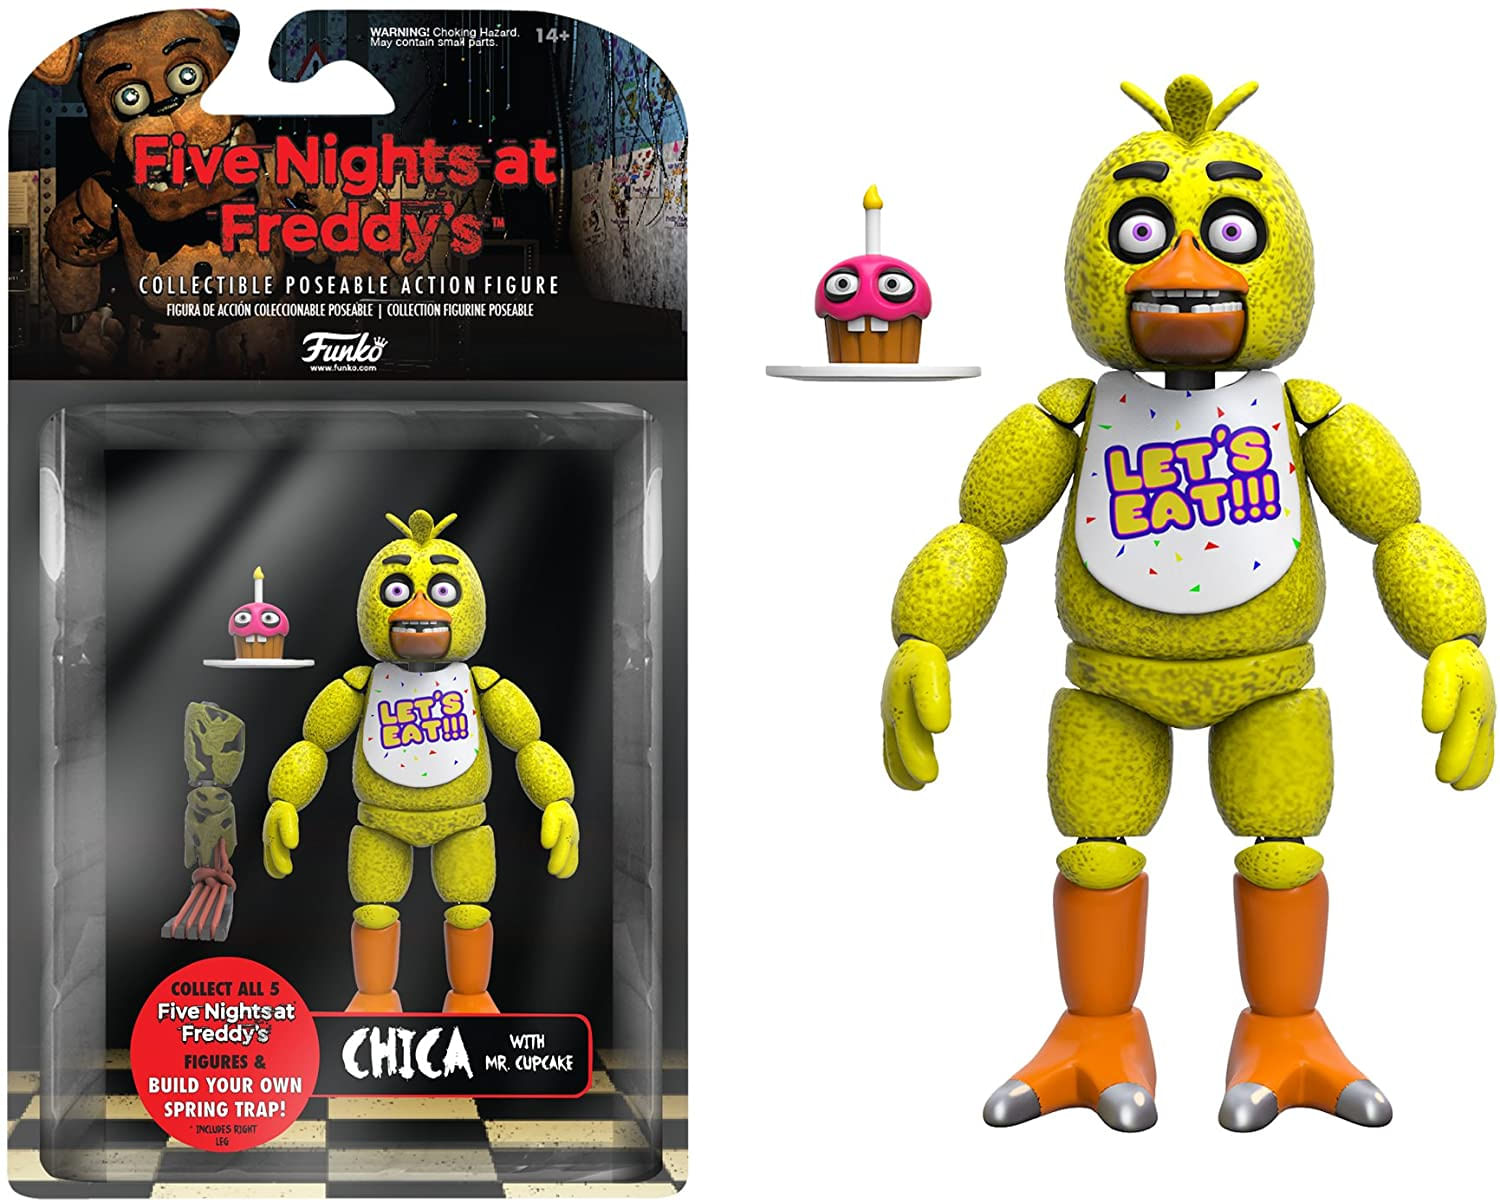 Five Nights At Freddys Security Breach Ps5 Midia Fisica em